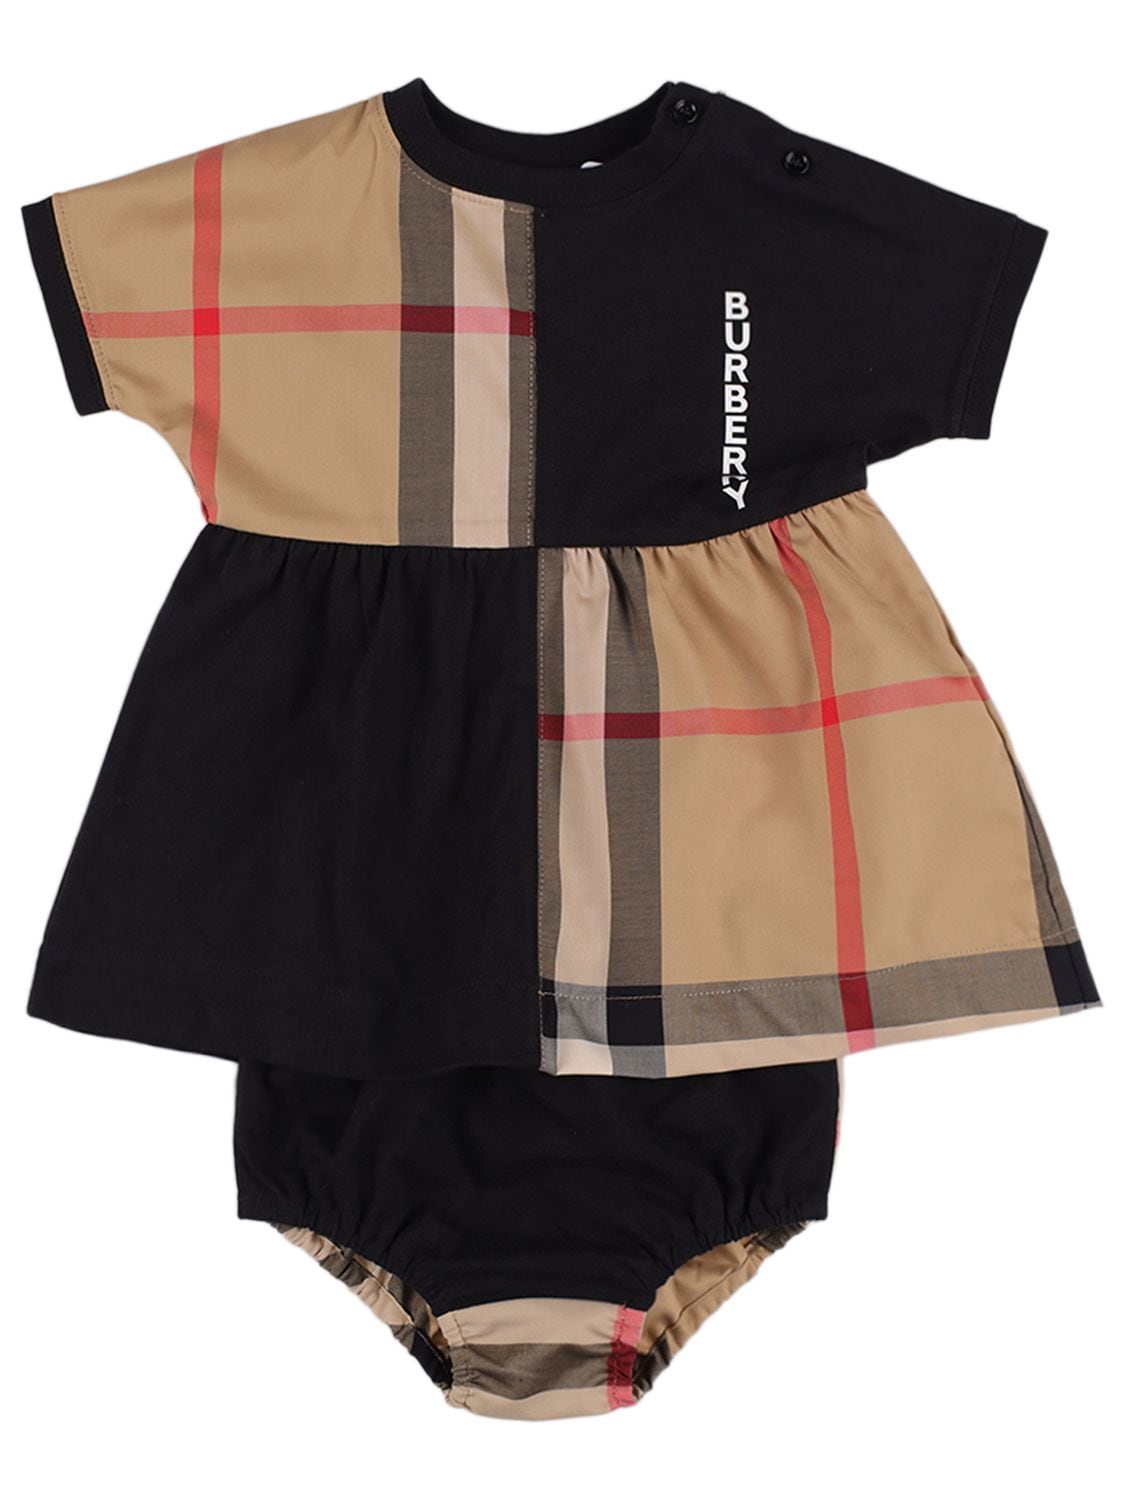 Burberry Babies' Dress & Diaper Cover W/ Check Inserts In Beige,black